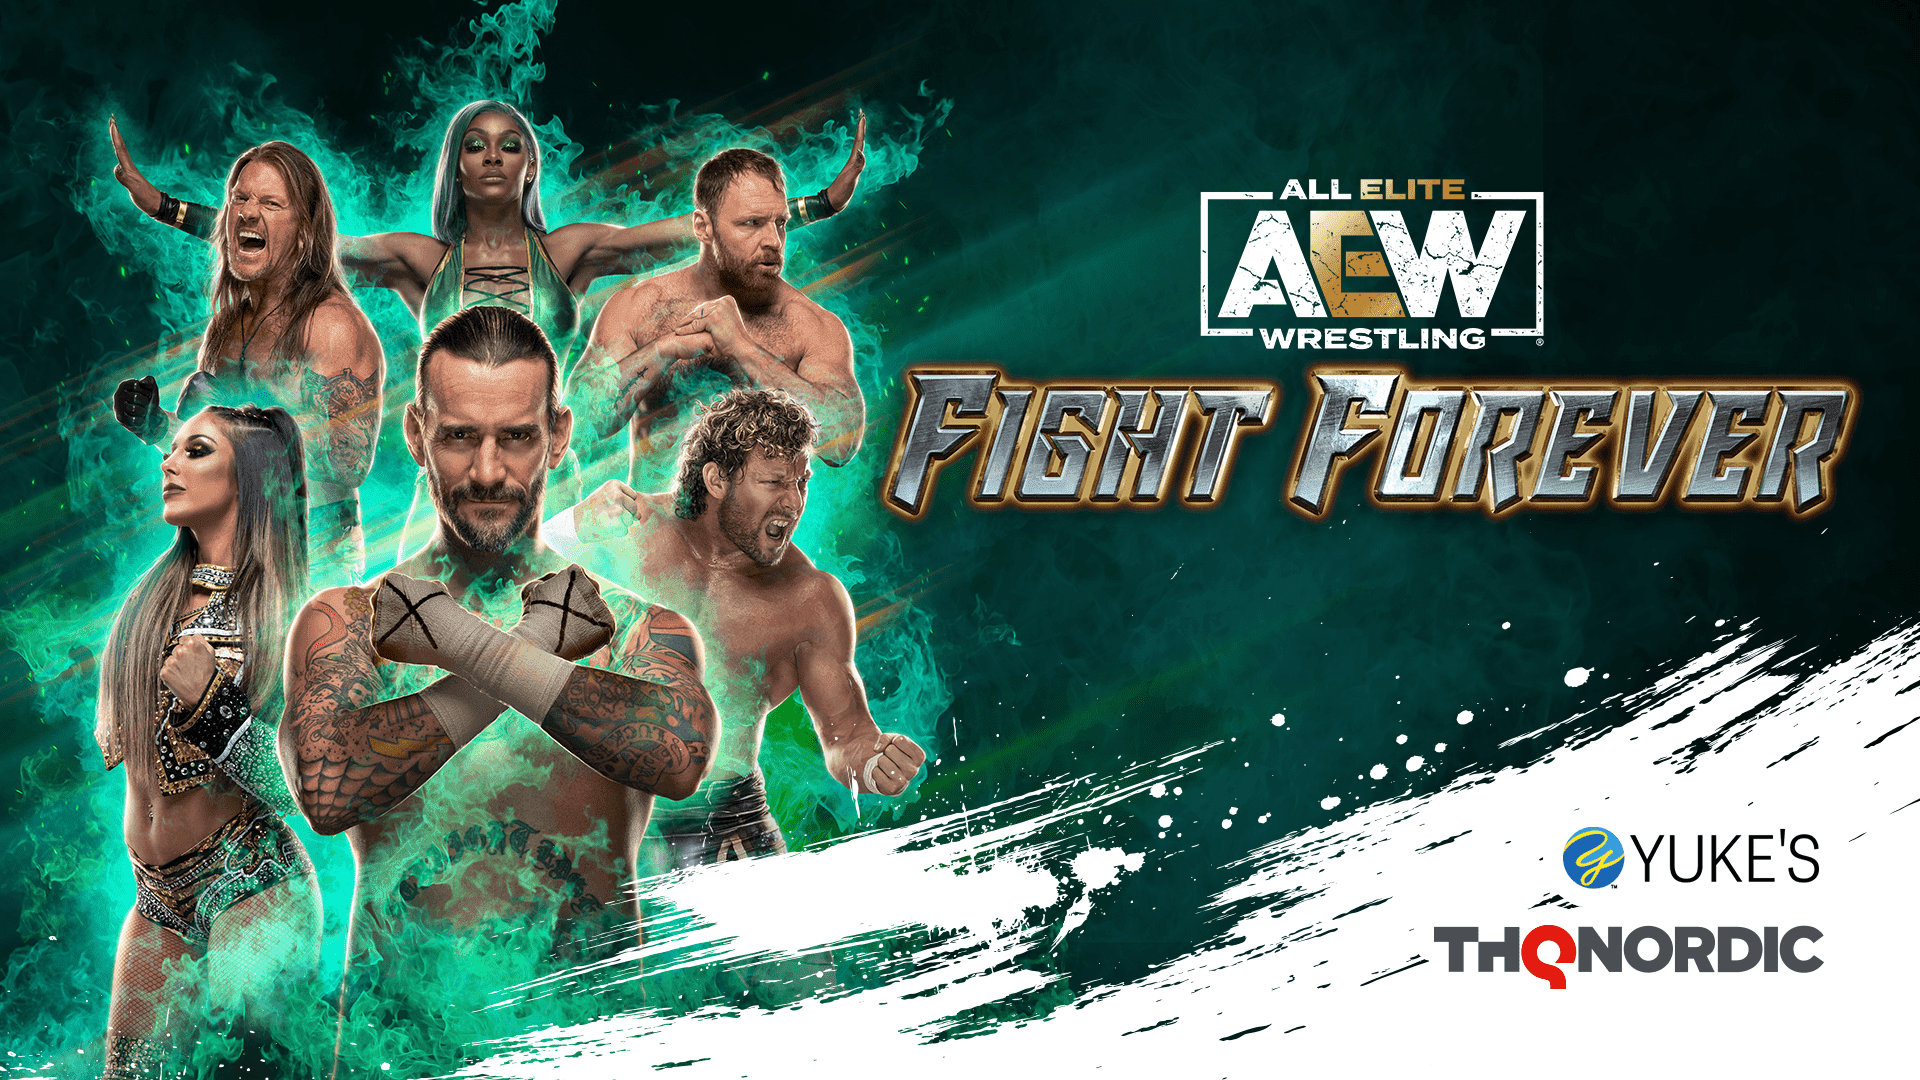 AEW Fight Forever promises to be the tagteam event of the century